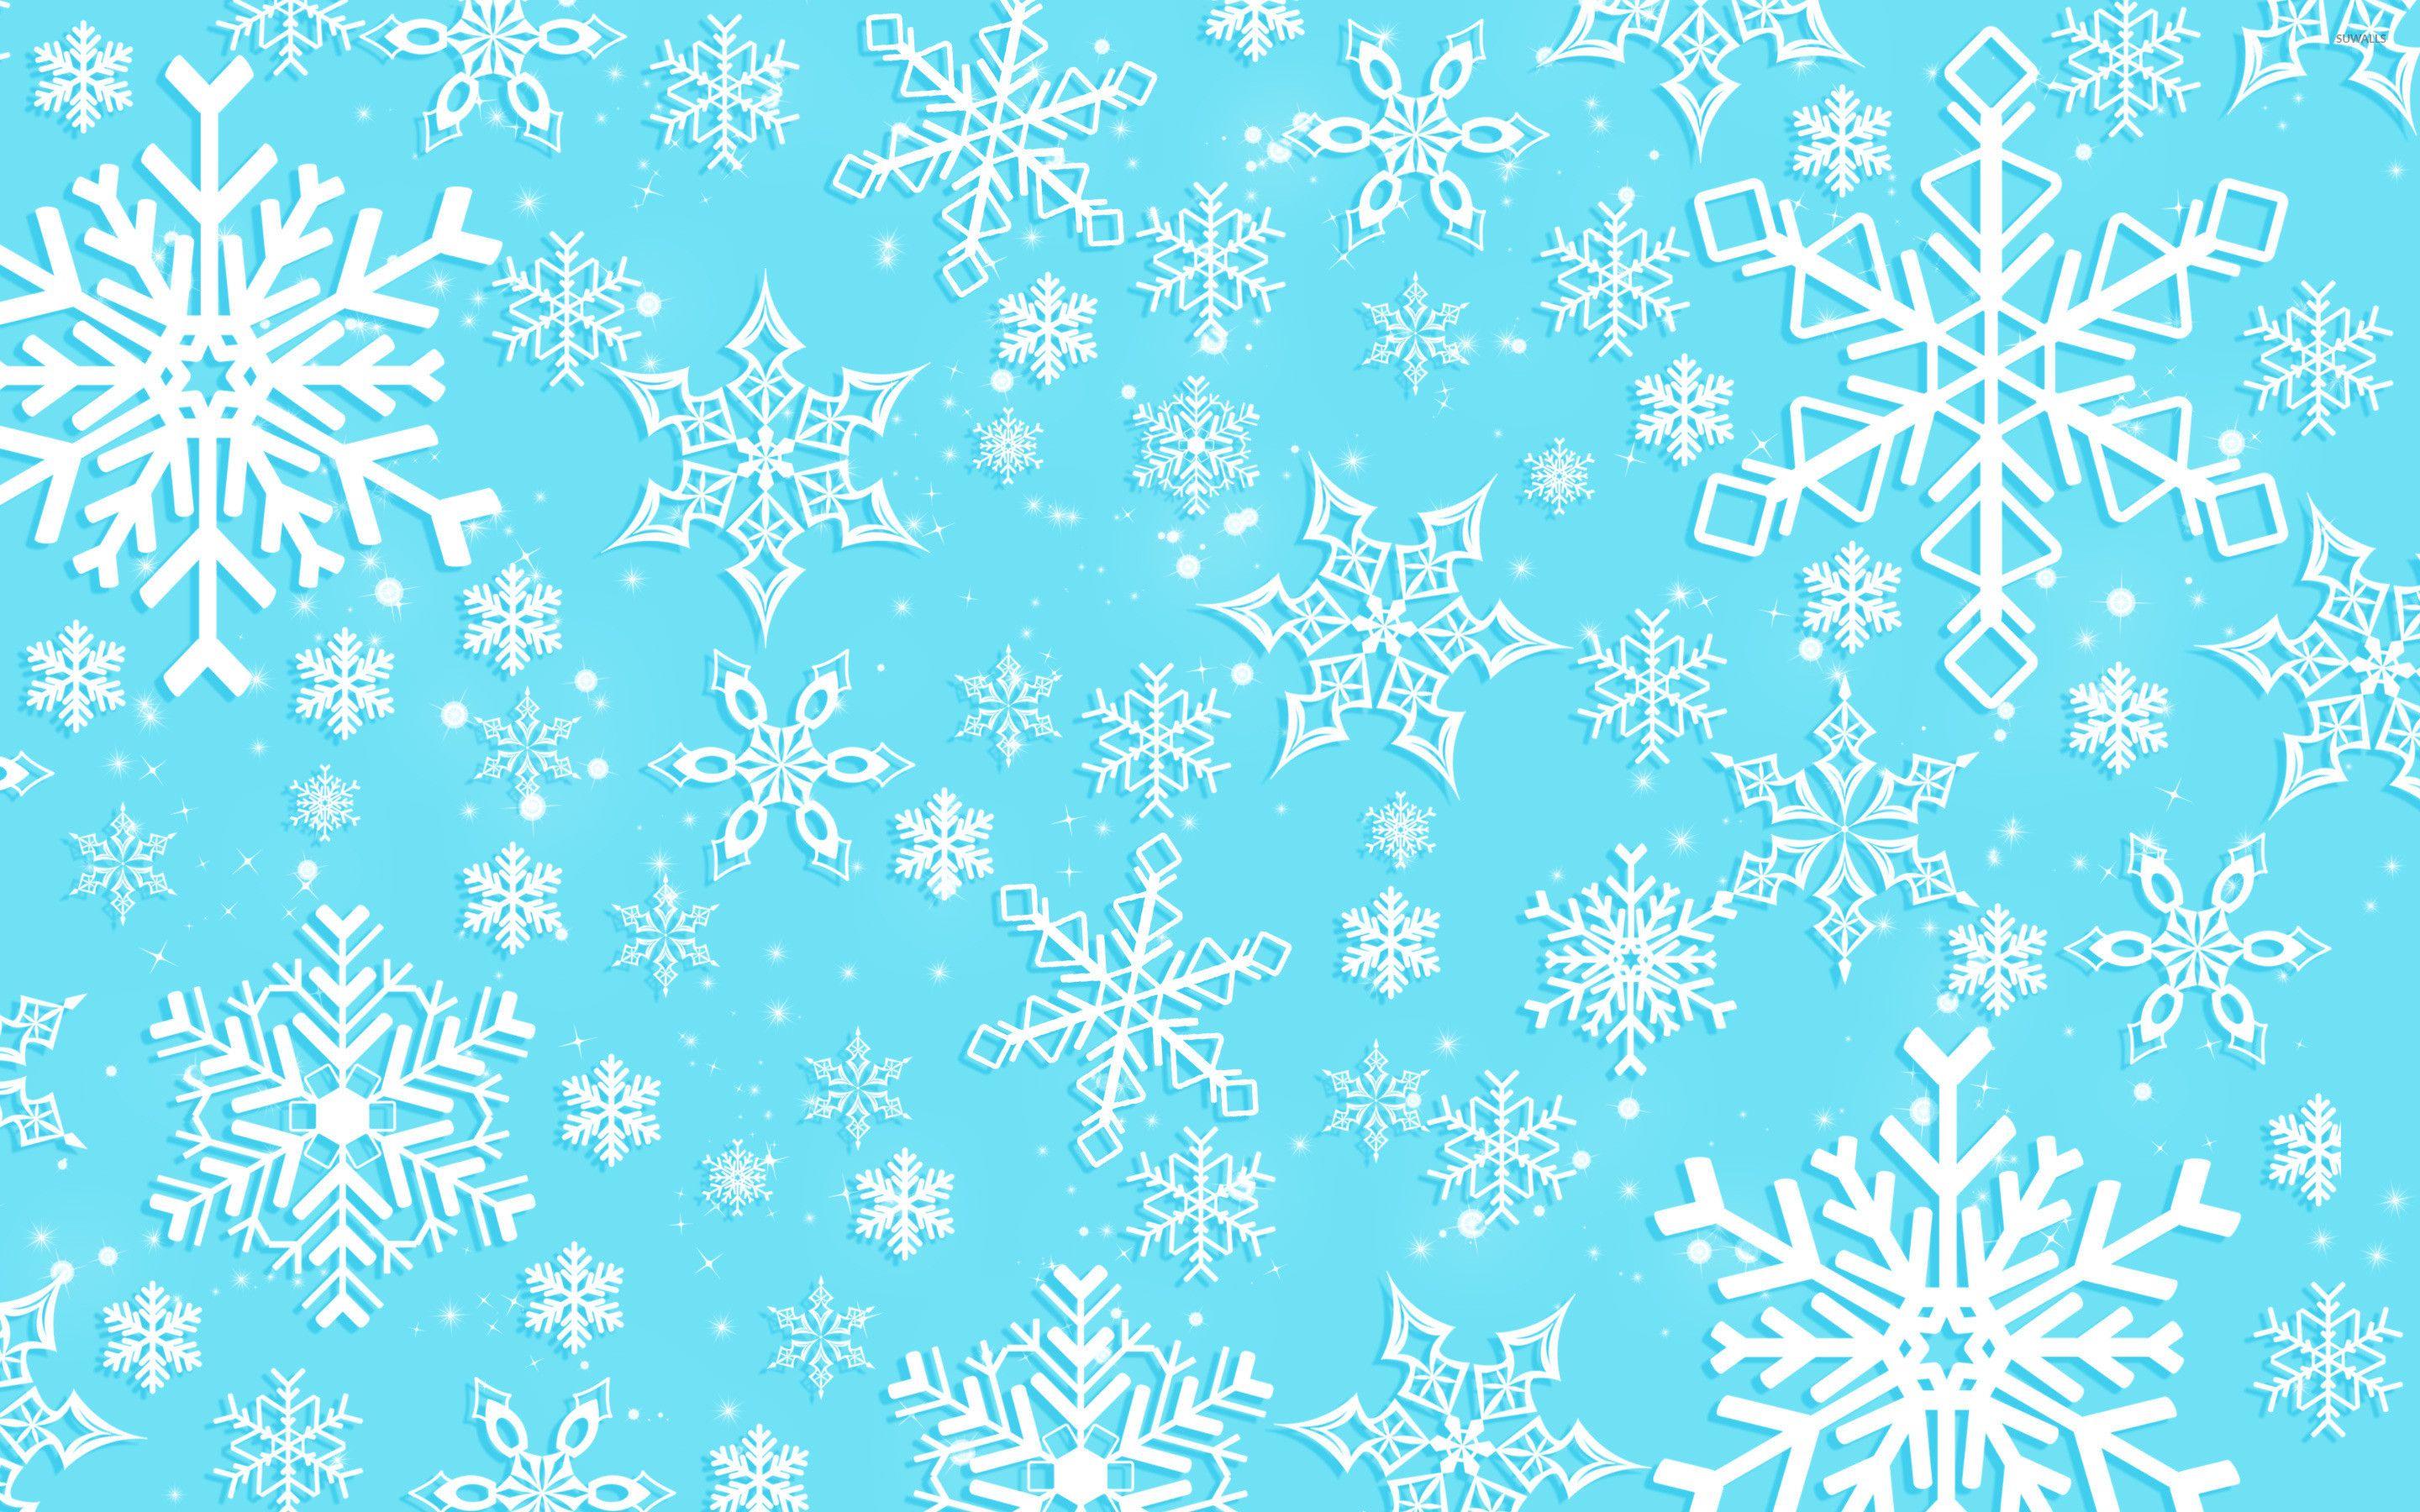 snowflake background images